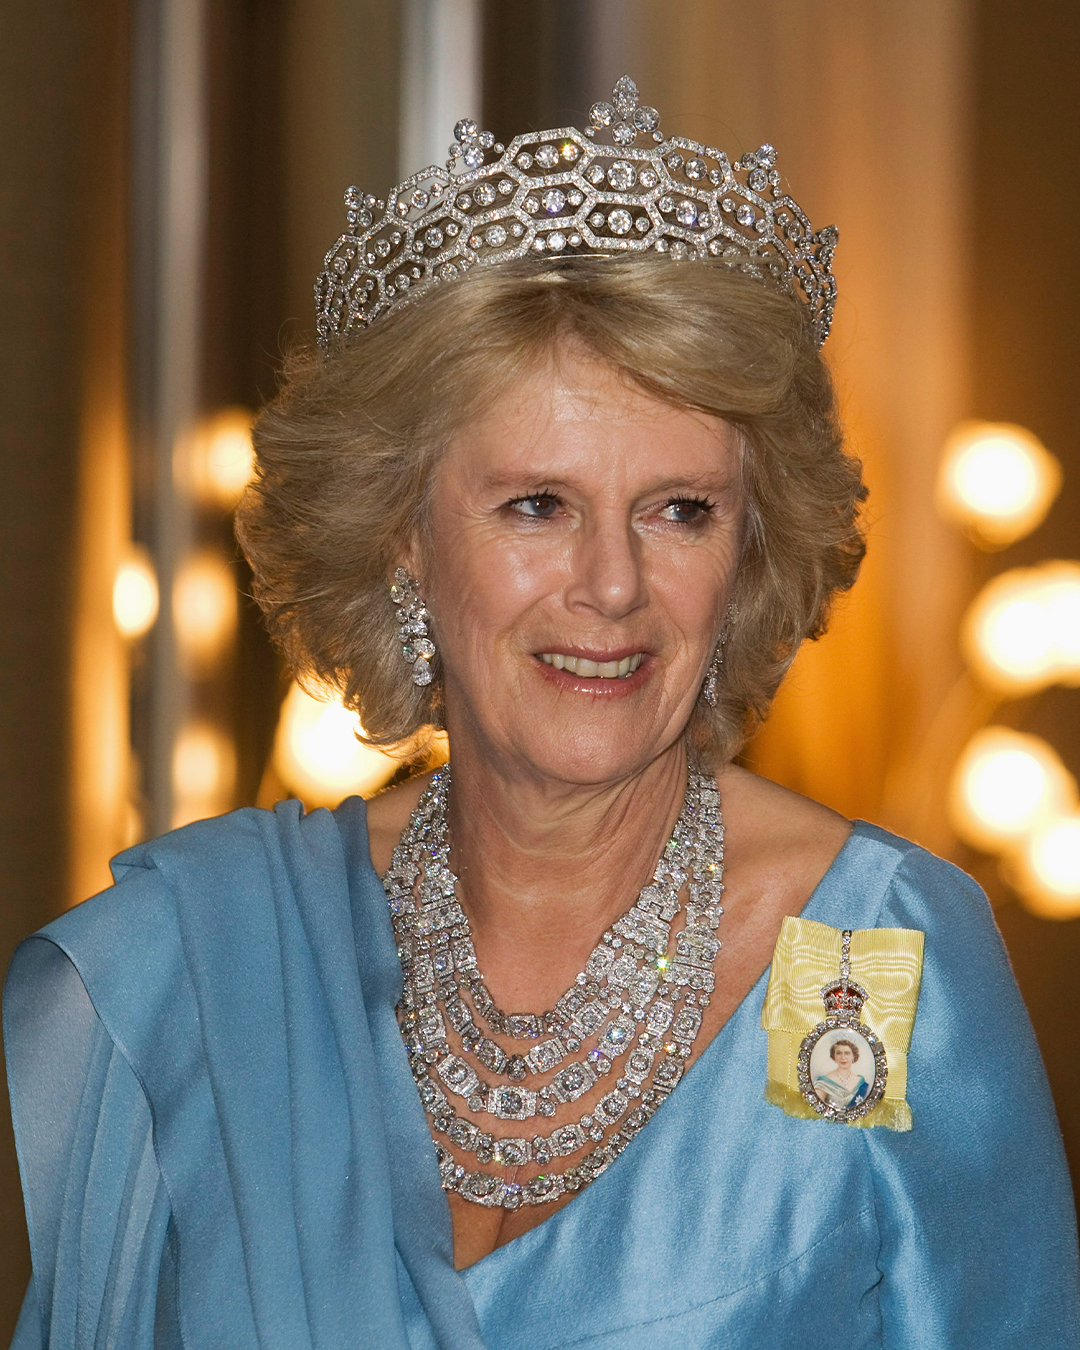 The Glorious Jewels of Camilla, The Queen Consort - Only Natural Diamonds